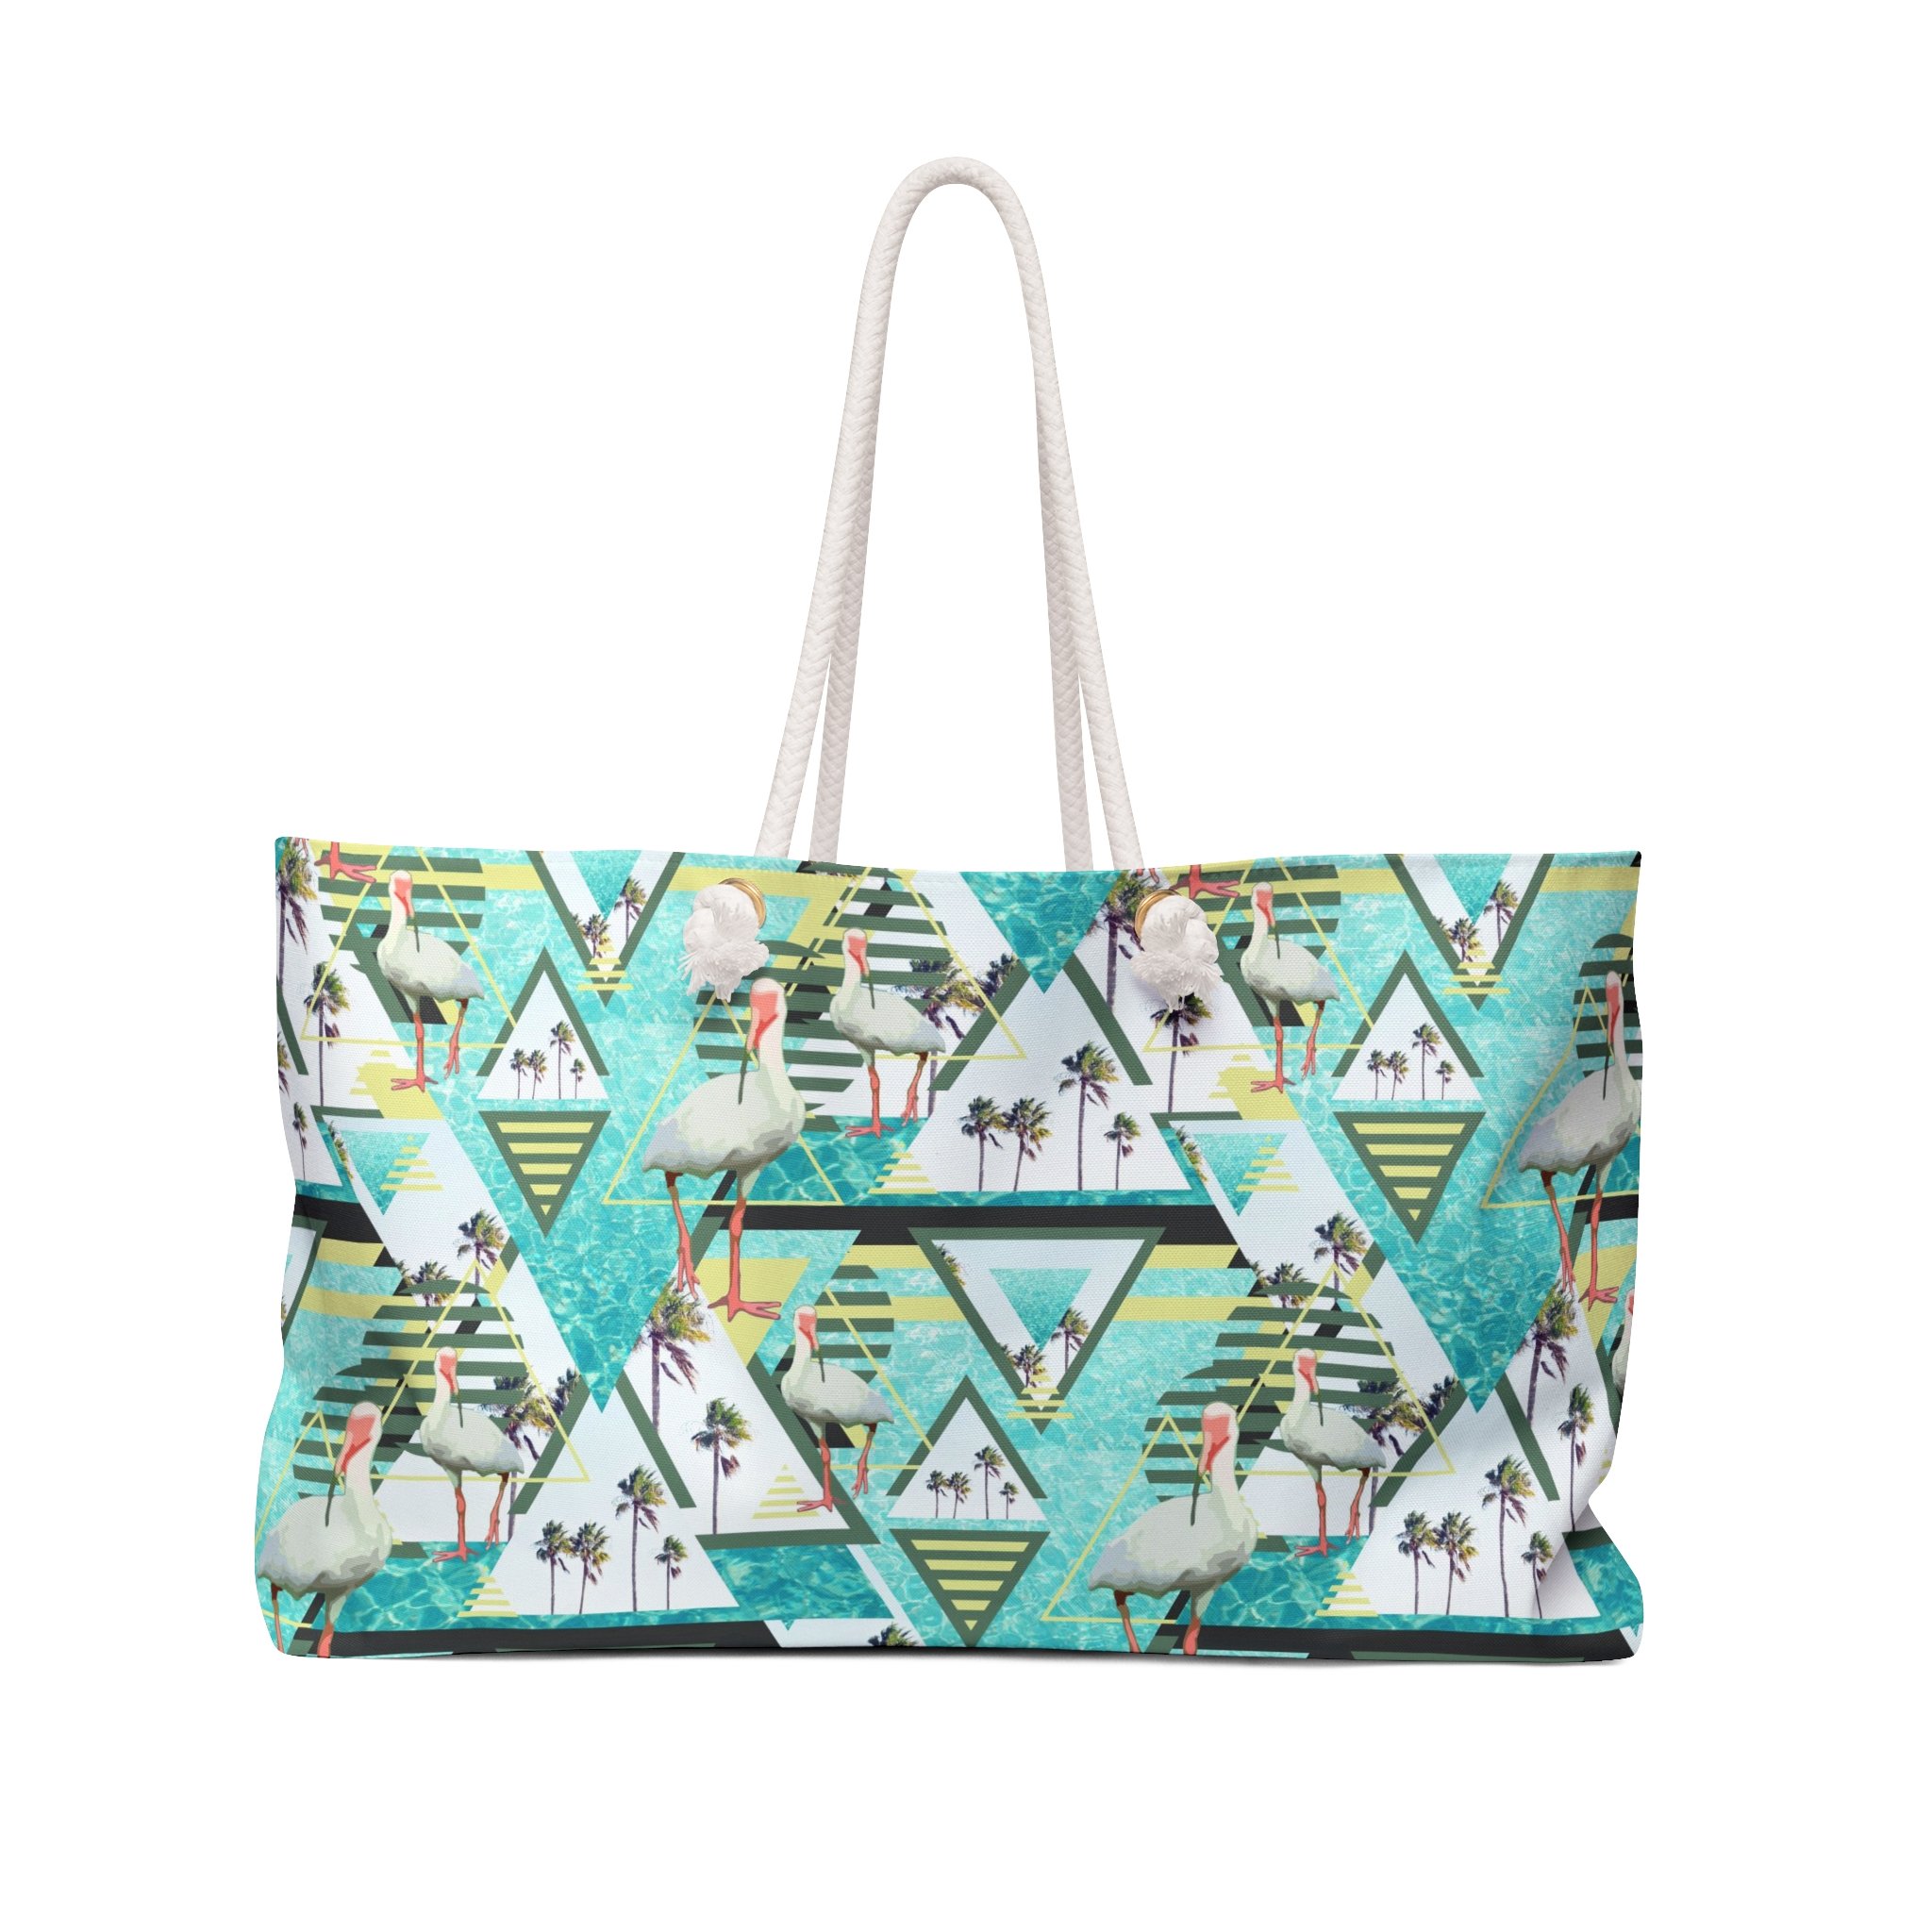 All Weekender Totes — Beach Surf Decor by Nature | City Co.